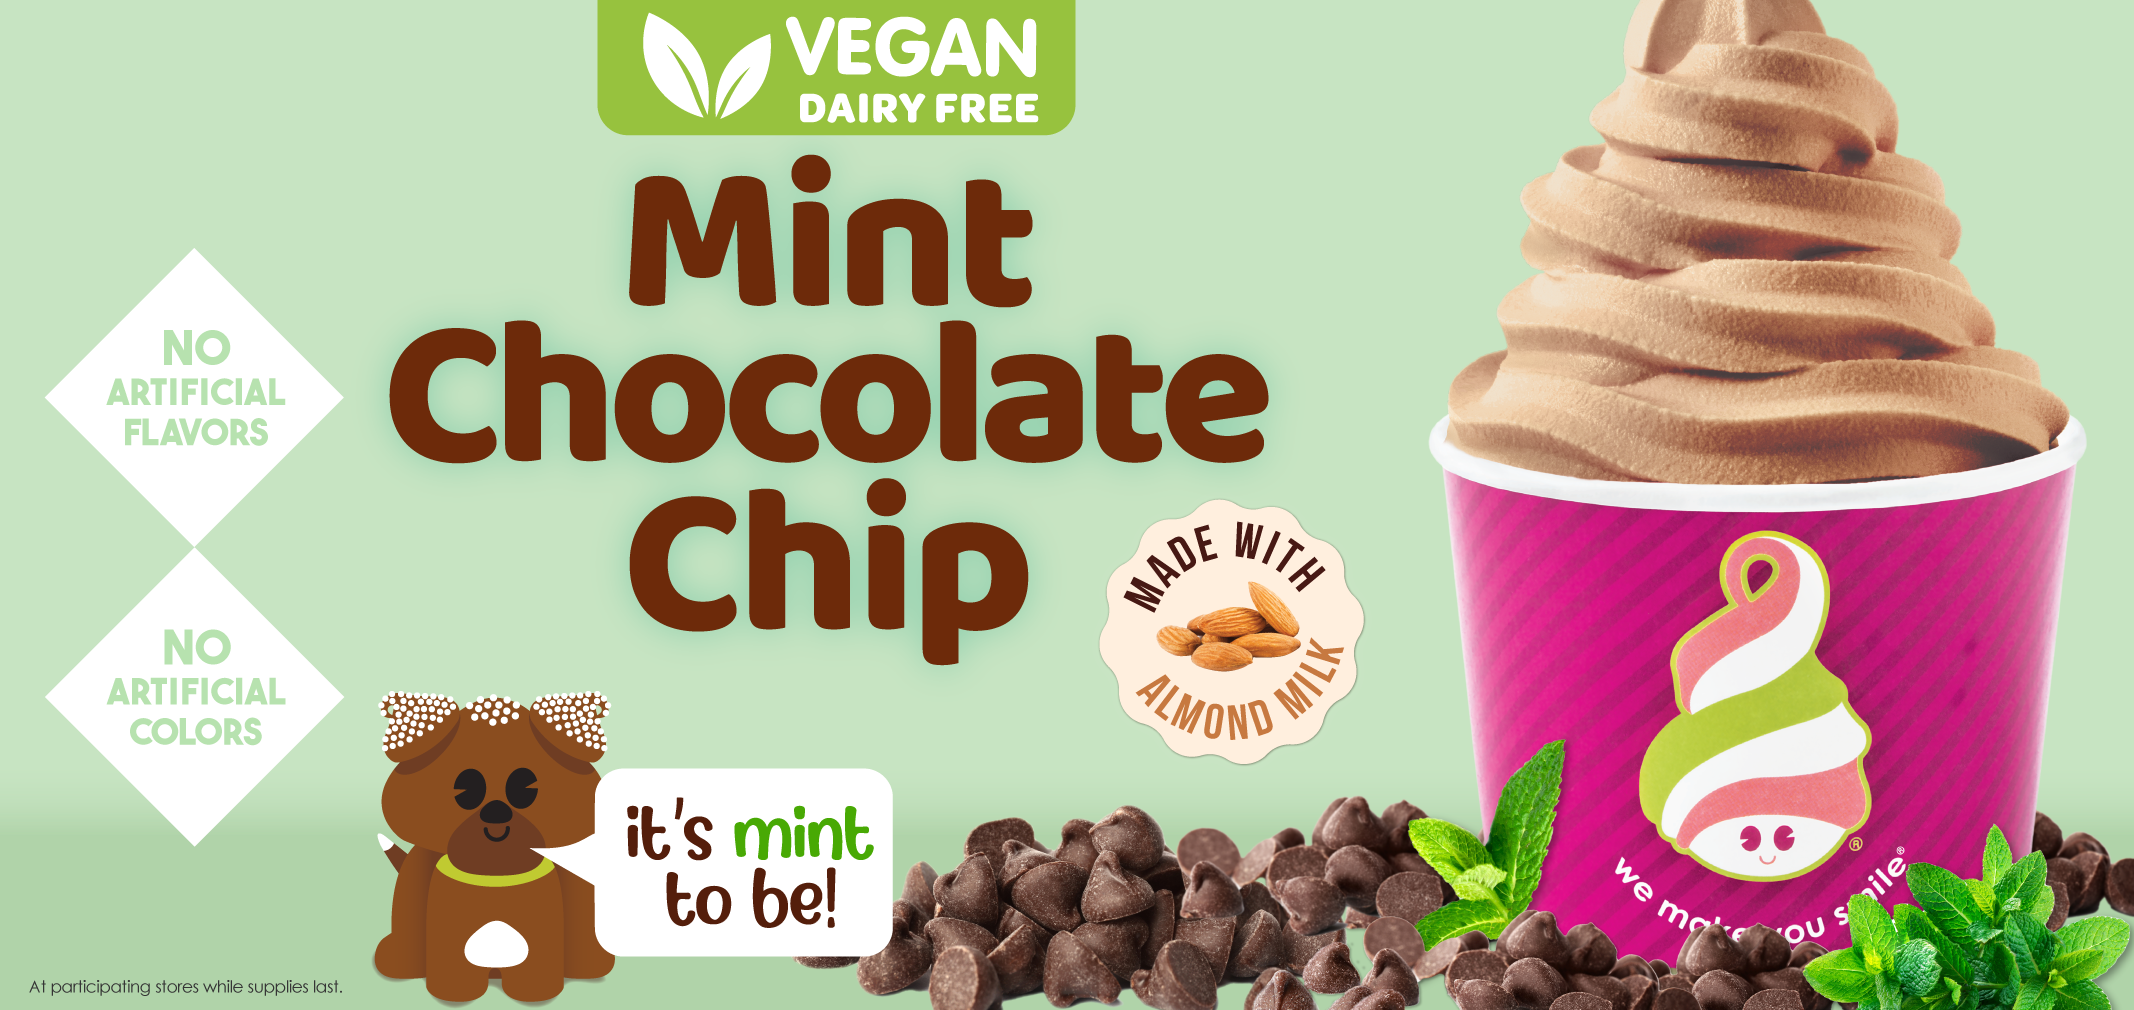 Vegan Mint Chocolate Chip made with Almond Milk label image